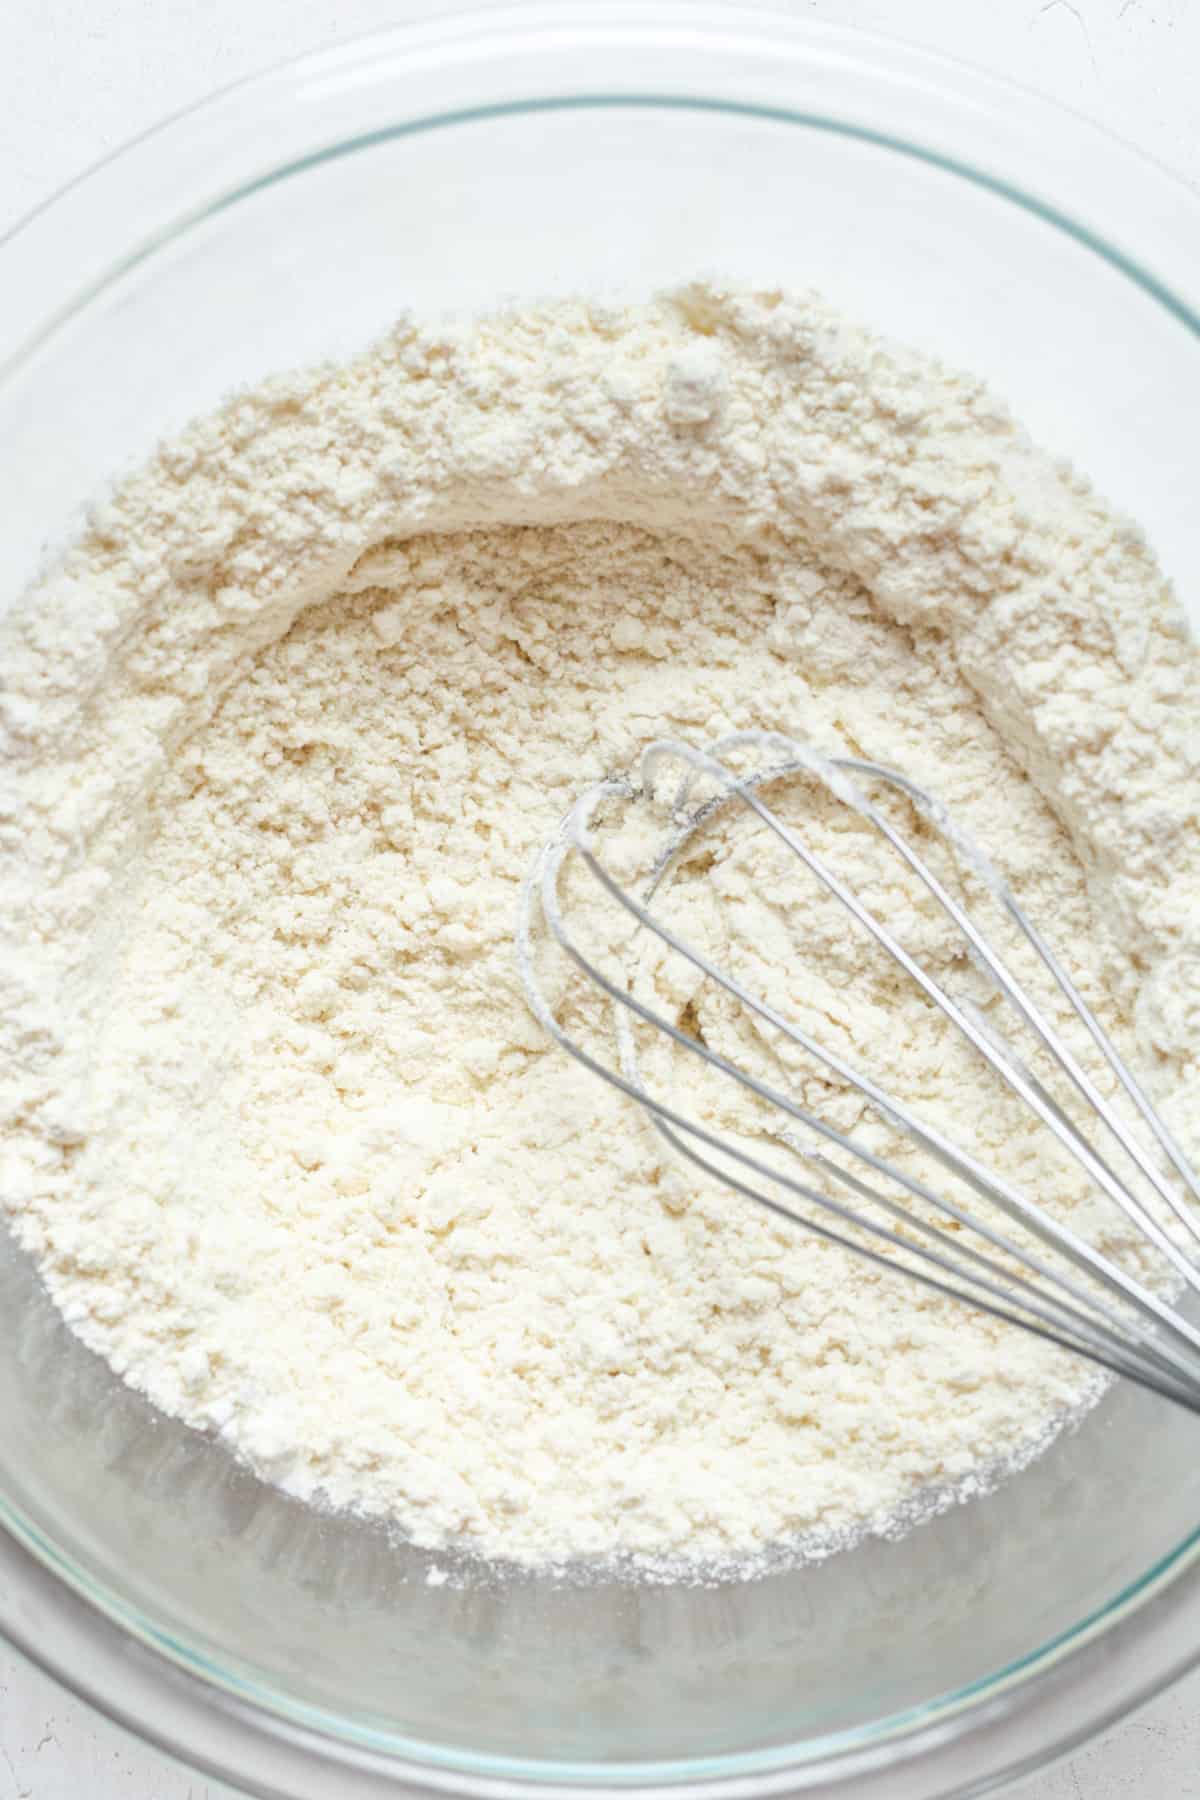 Whisked flour and sugar.